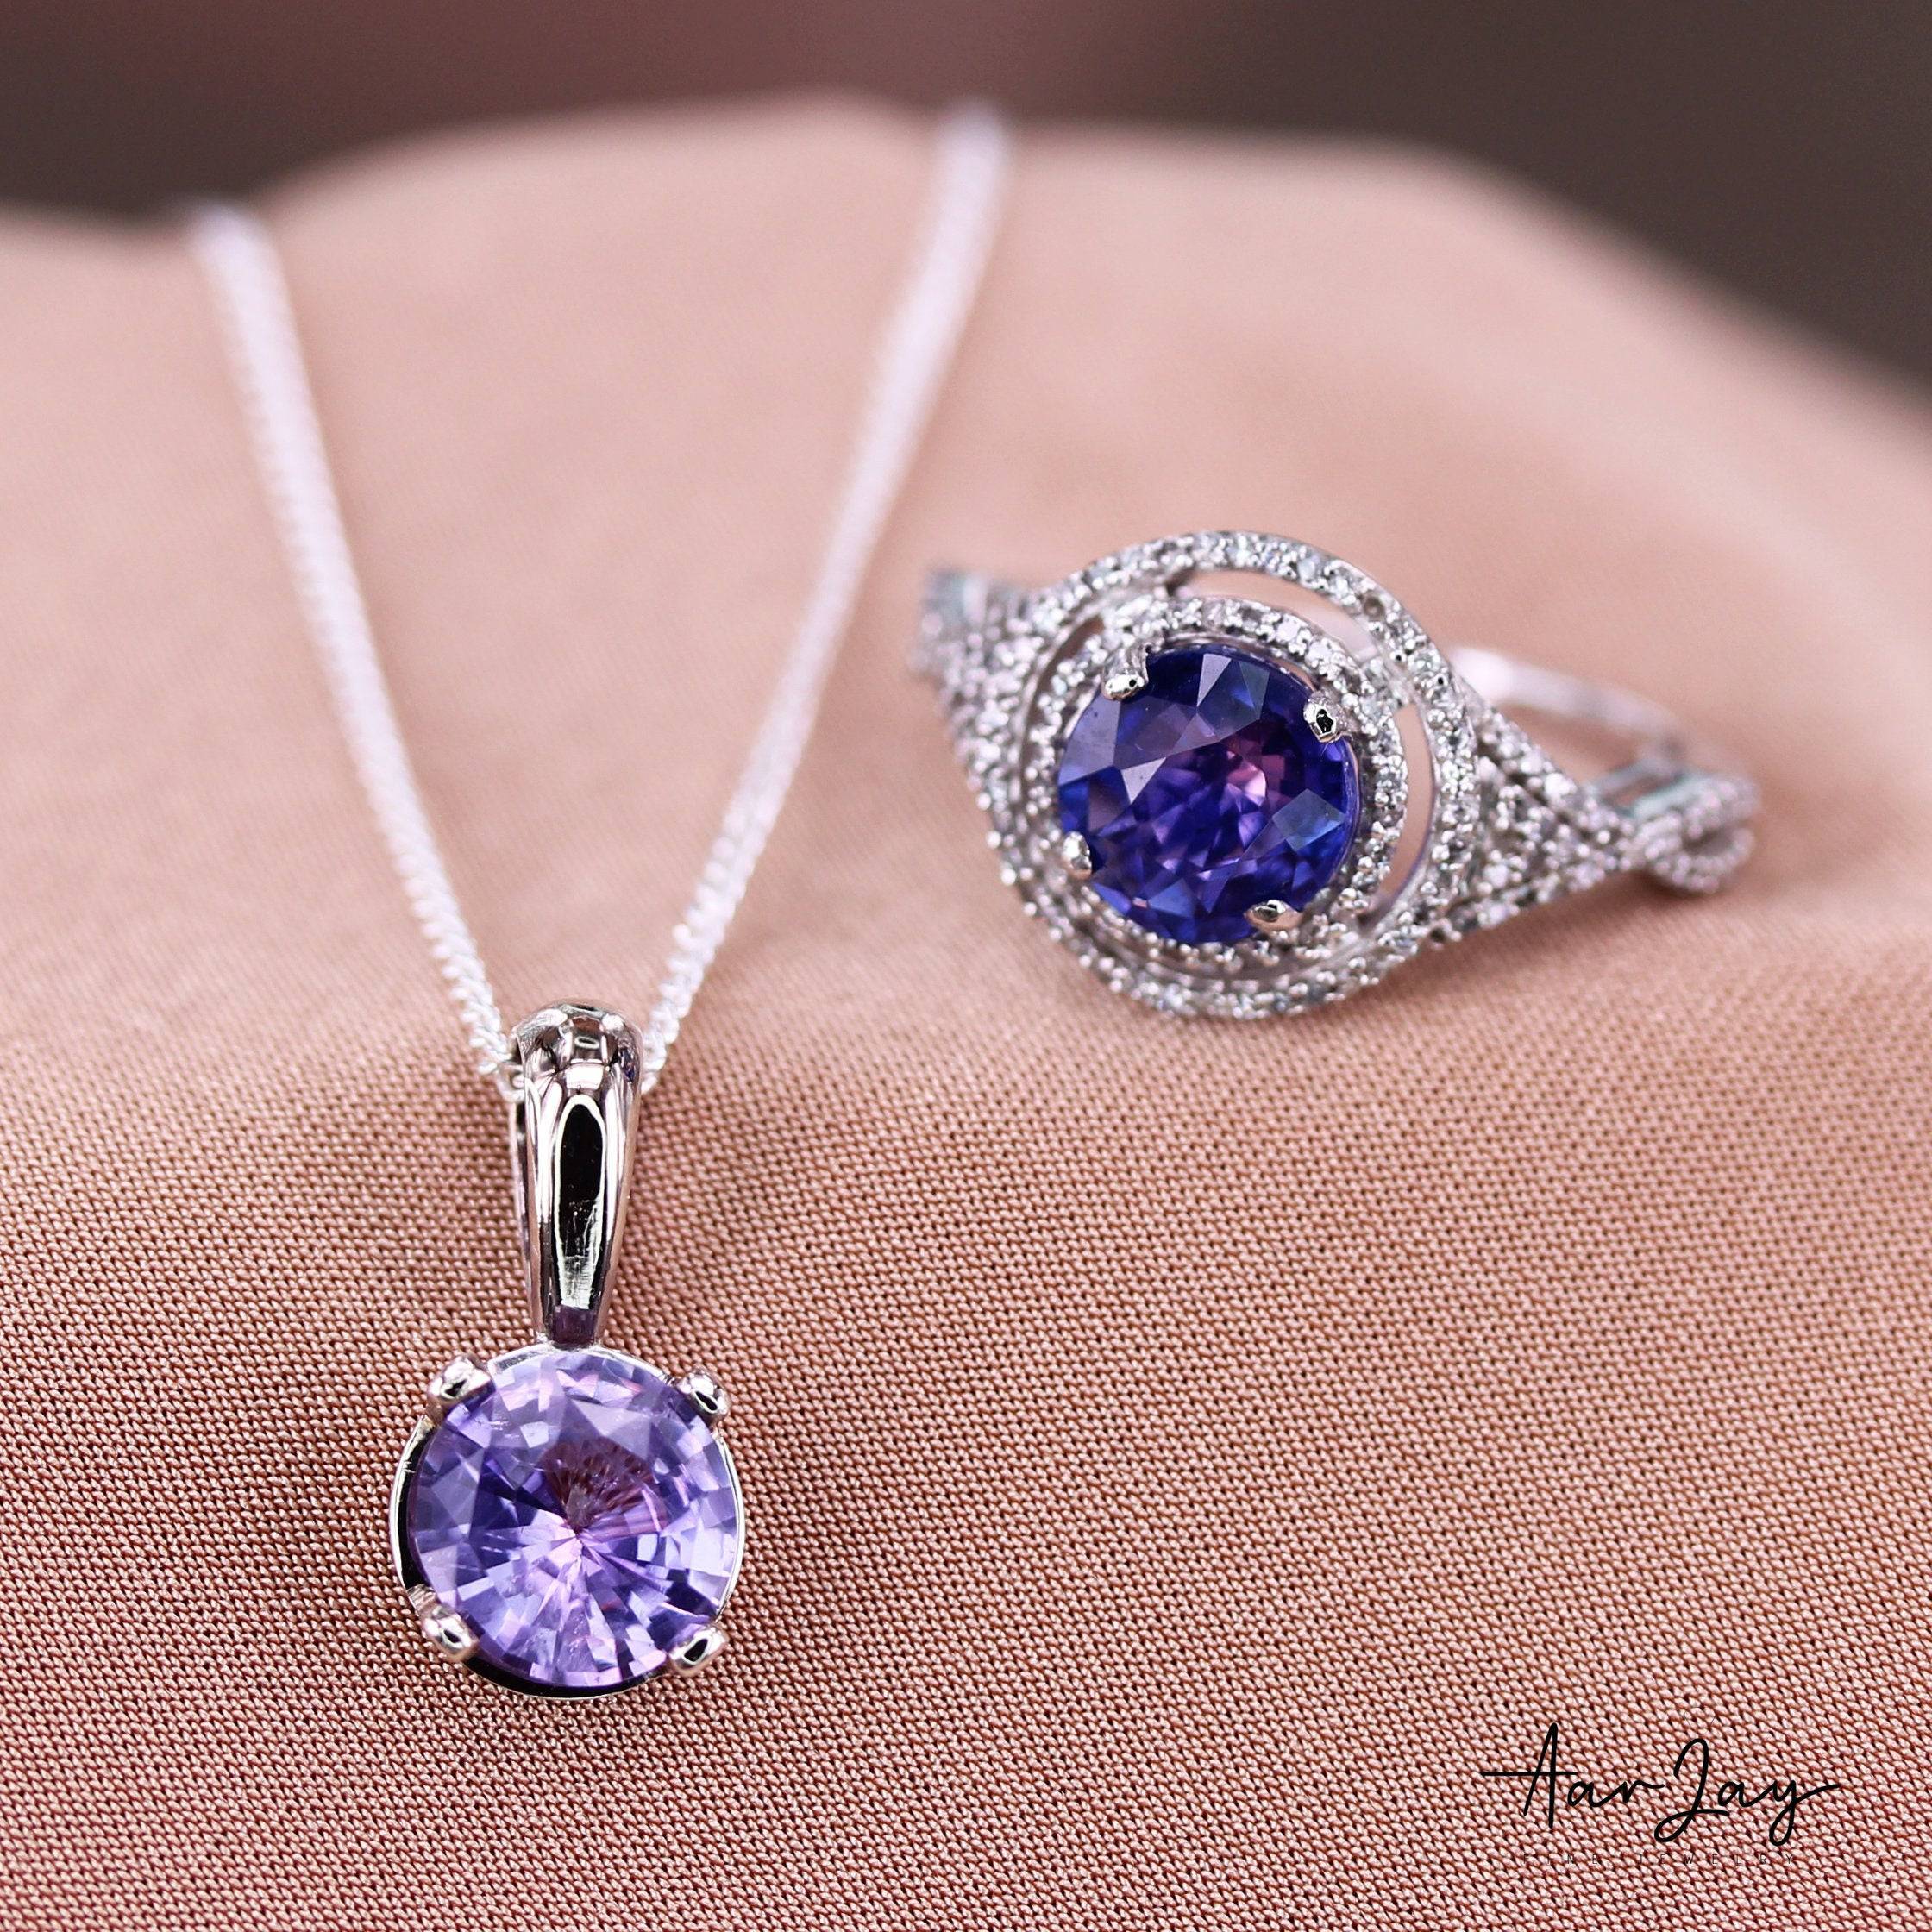 Luxurious Lavender Bliss: 14K White Gold Ring with 2.02 Cts Unheated Sapphire – Elegant Purple Gemstone Delight! - Baza Boutique 